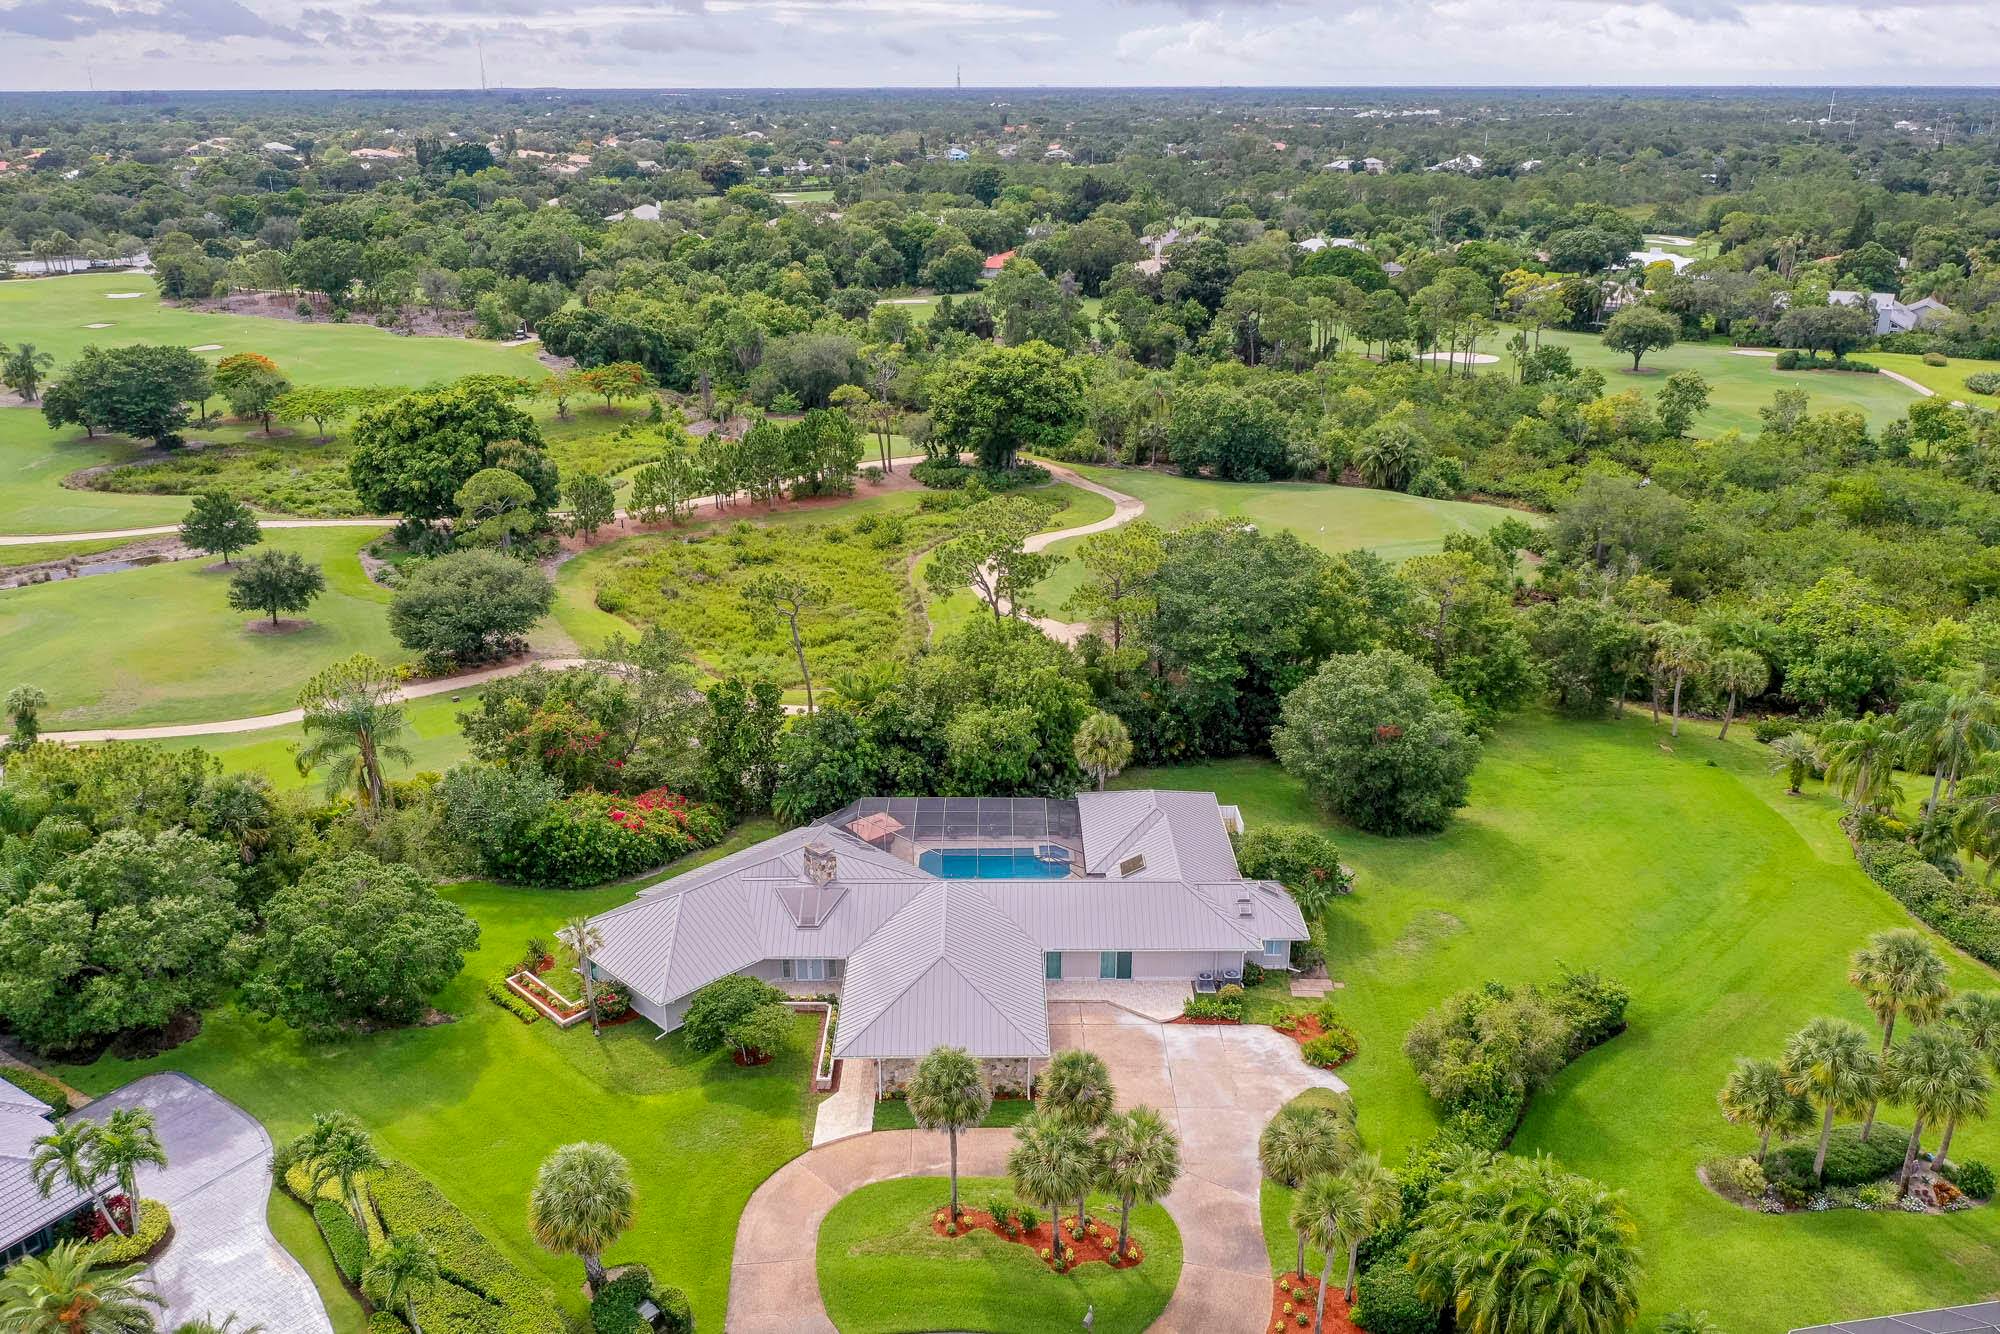 Spectacular home in Piper's Landing Yacht and Country Club, cul de sac with 1 acre.